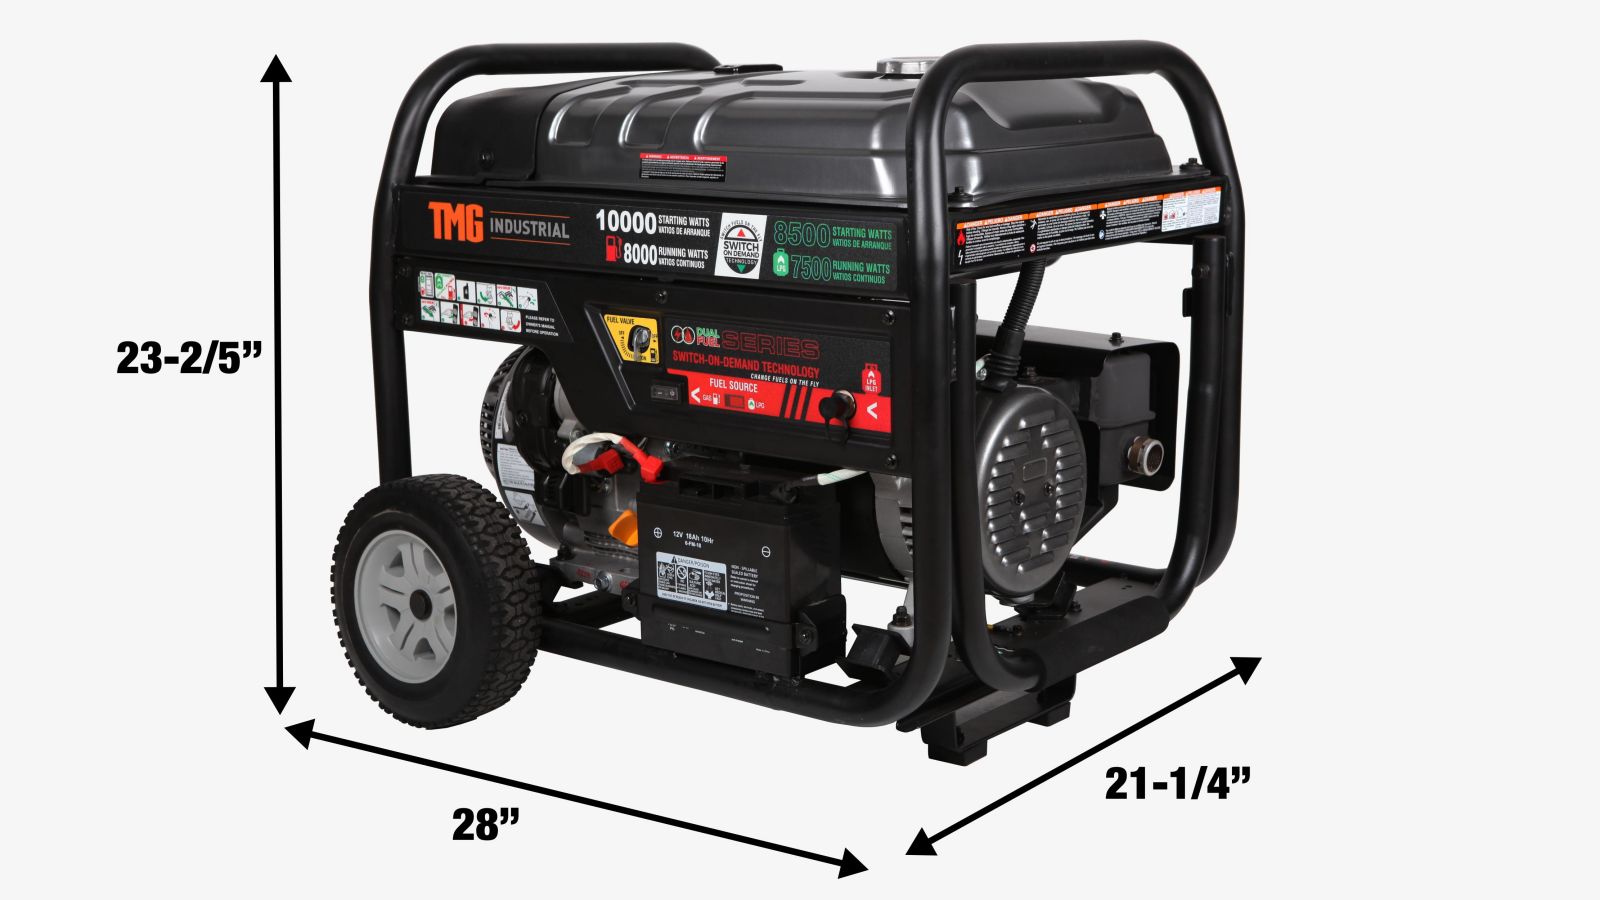 TMG Industrial 10,000-Watt Dual Fuel Generator (Gasoline and LPG) with Electric Start, 8.5 Hour Run Time, TMG-10000GED-specifications-image